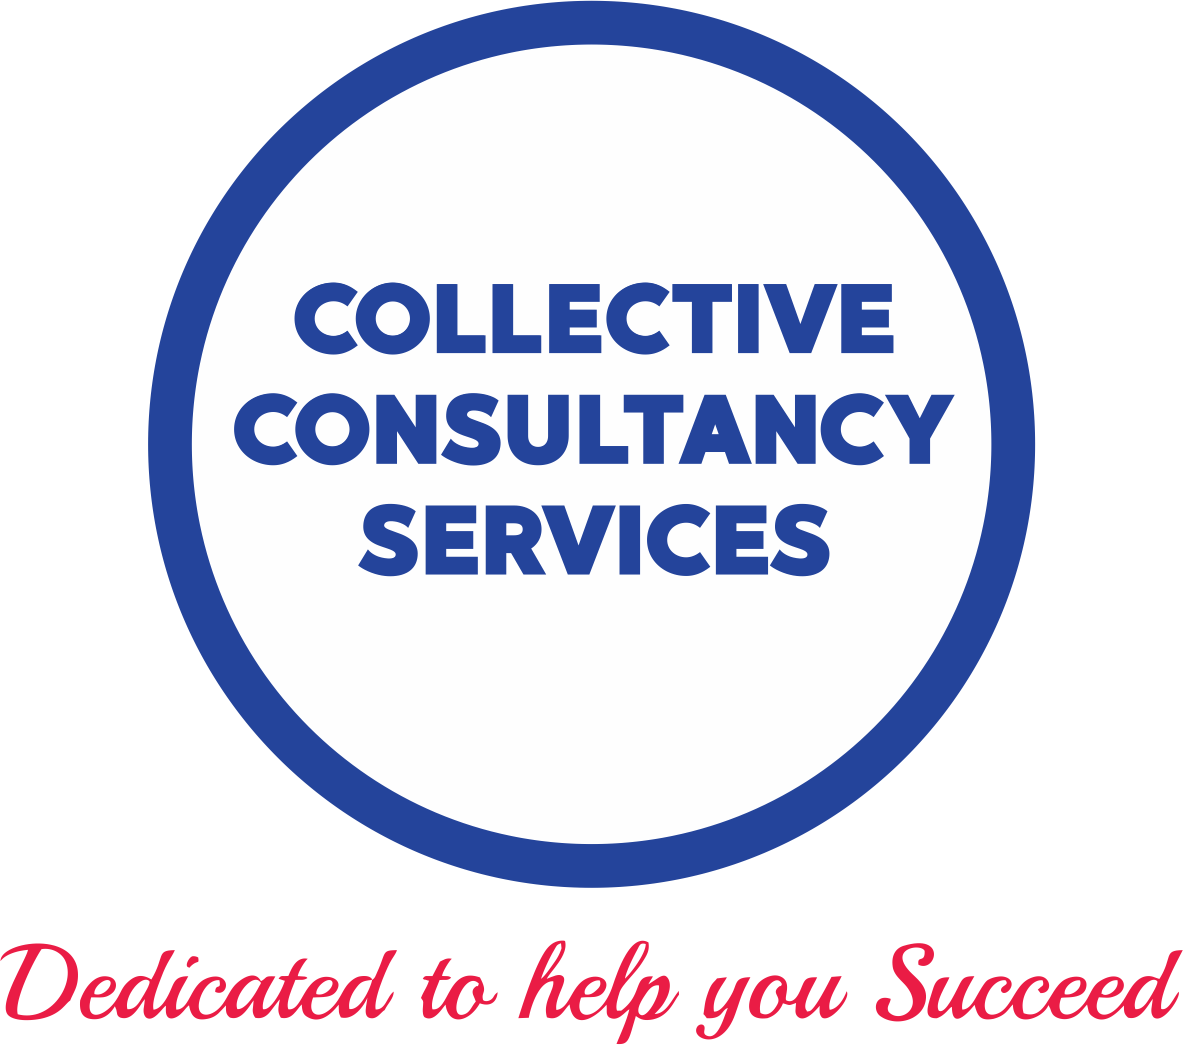 Collective Consultancy Services